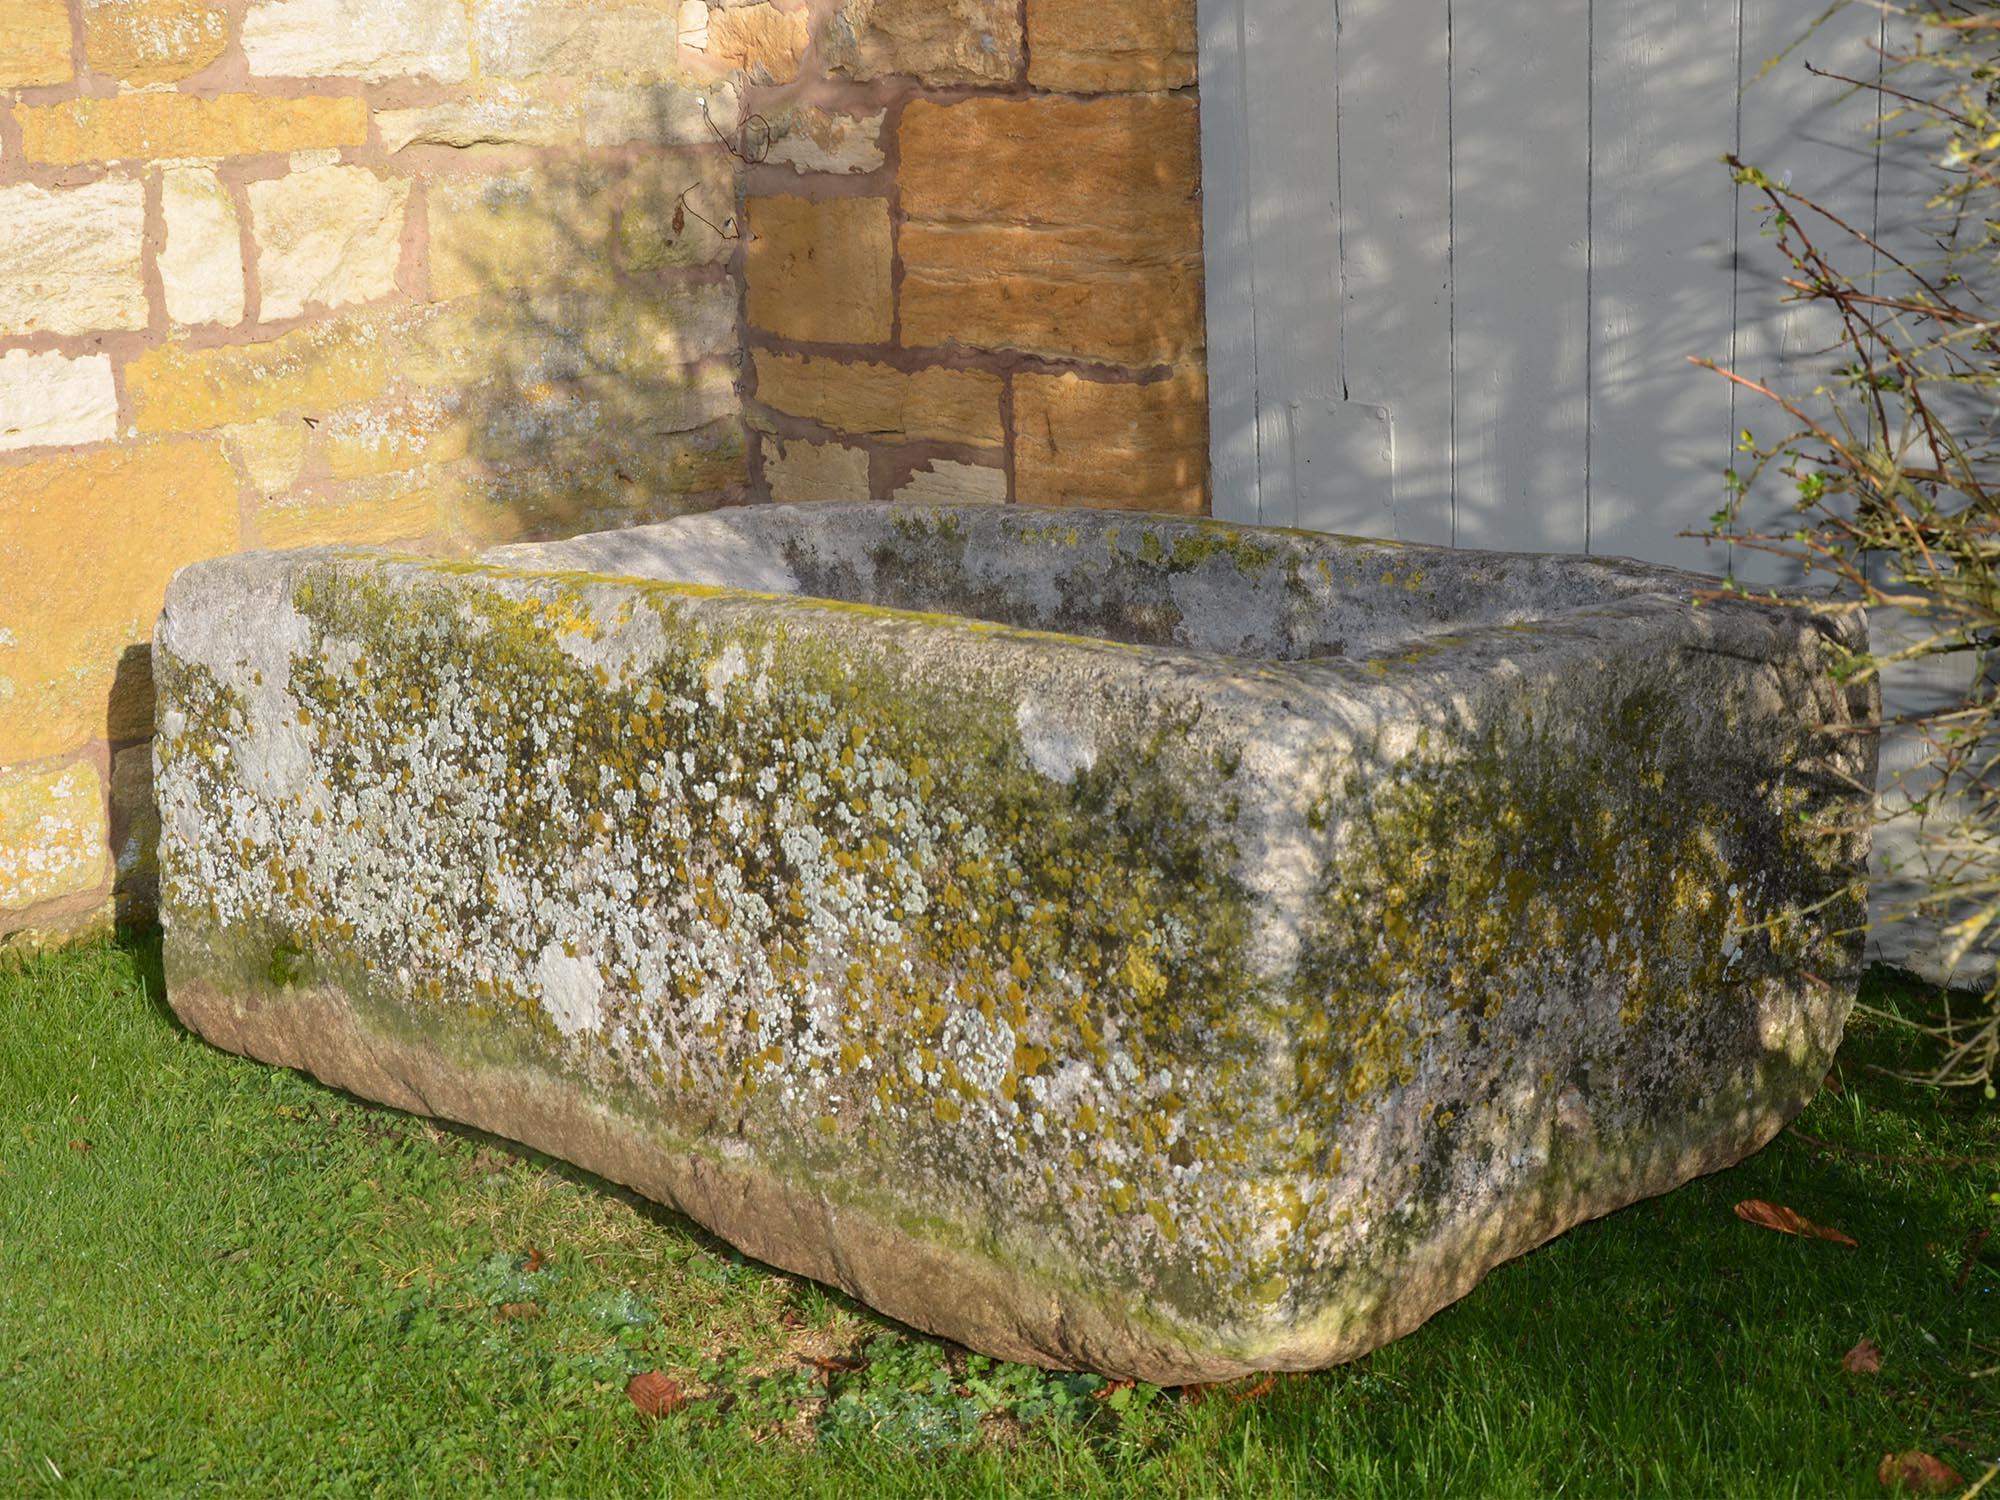 18th century stone trough with good weathering and patination.